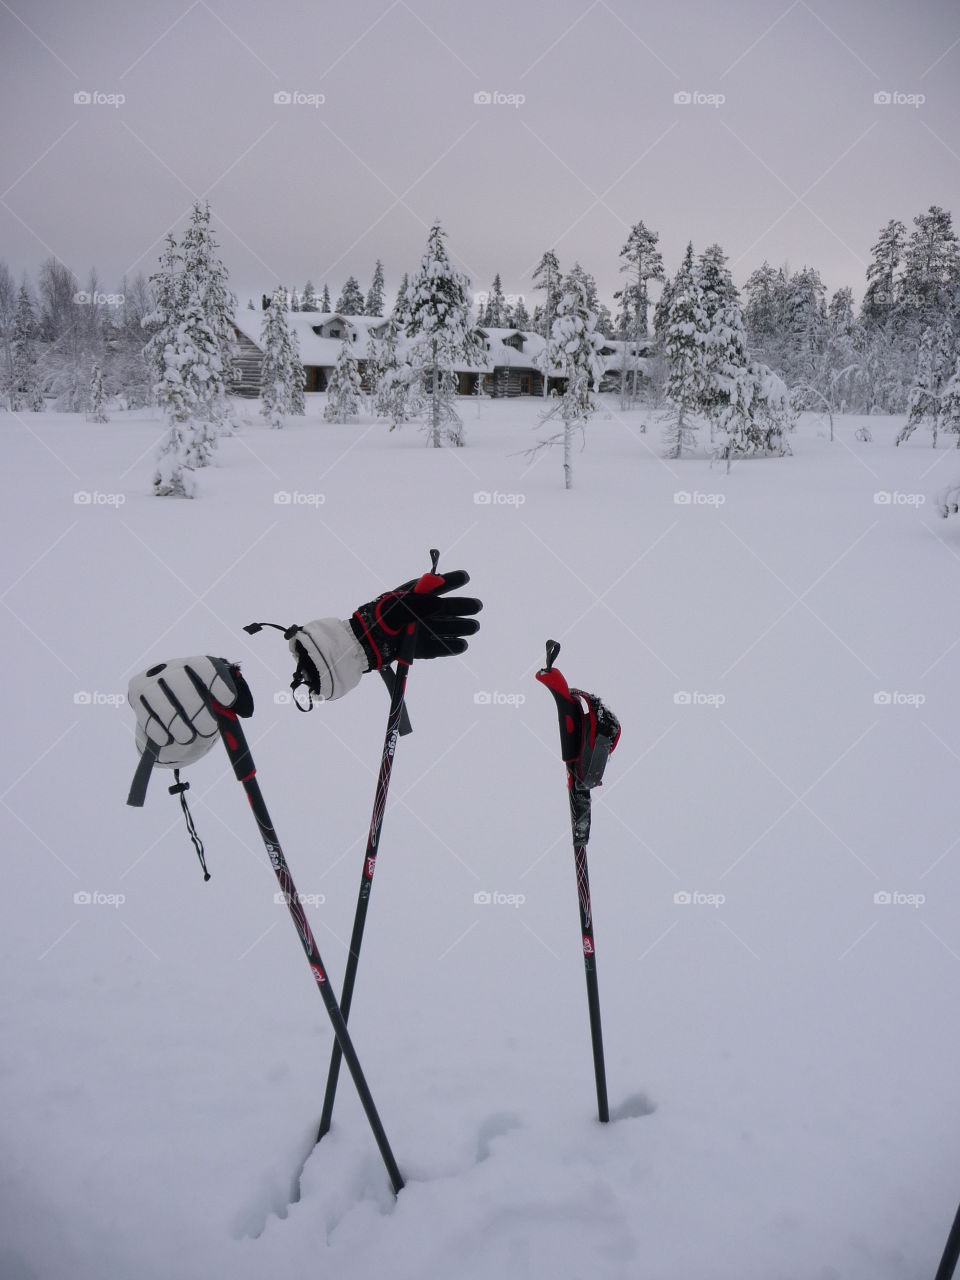 Ski pole and gloves in snow